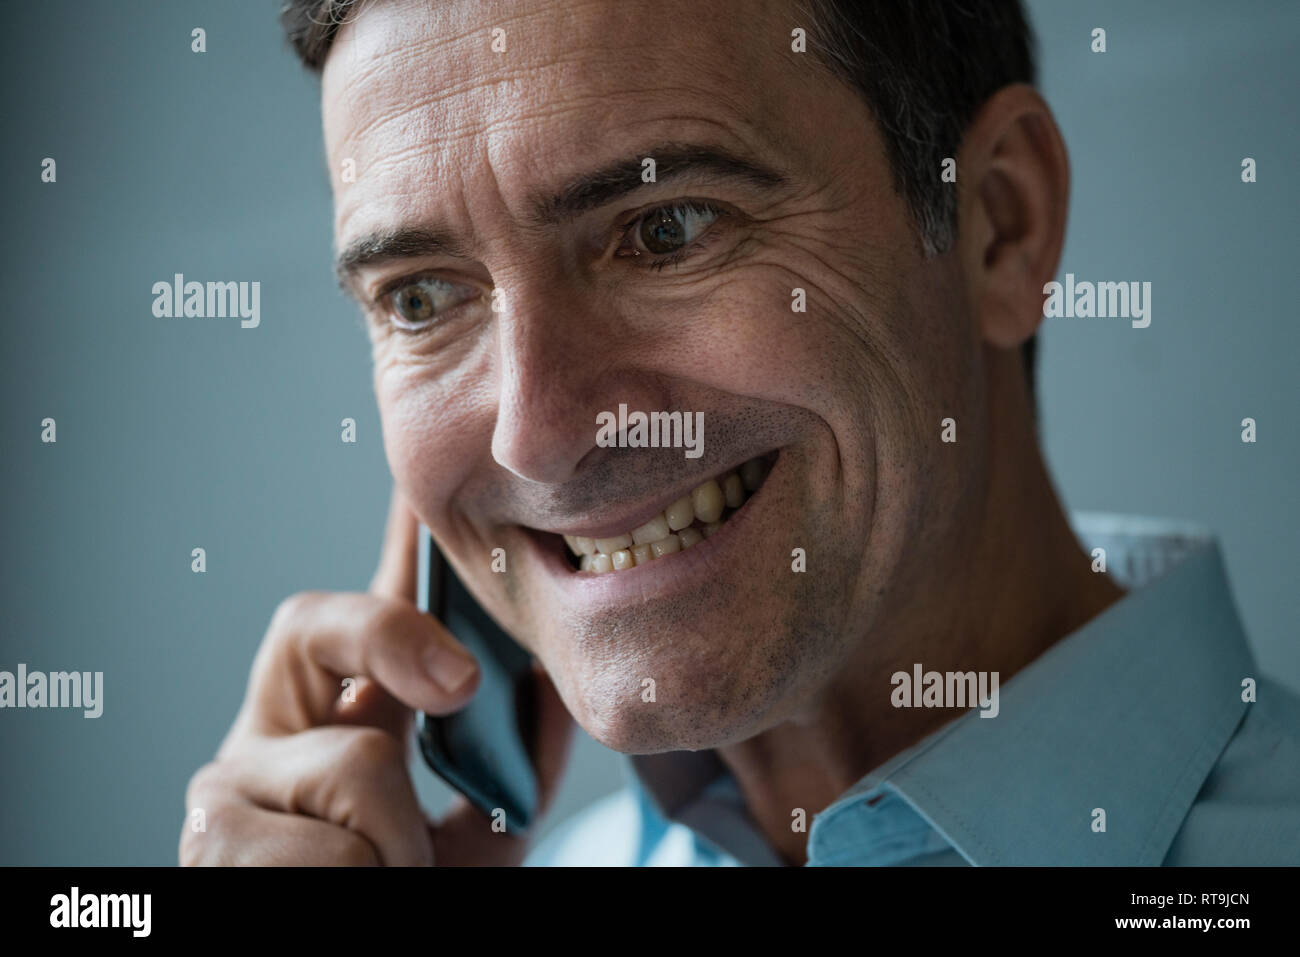 Portrait of grimacing businessman on cell phone Stock Photo